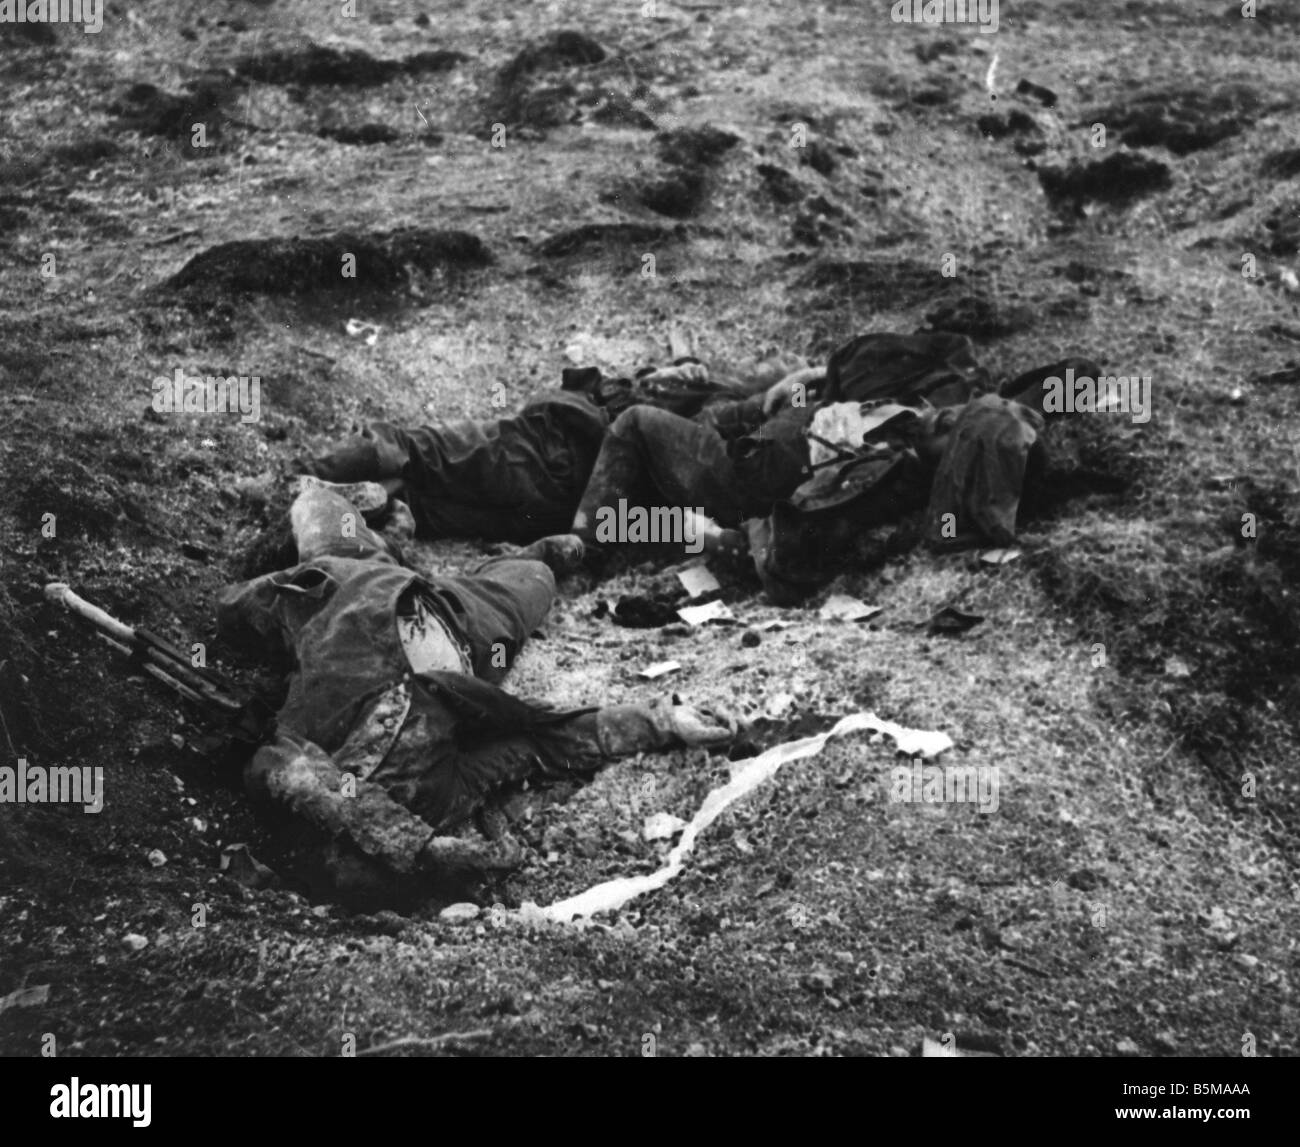 2 G55 W1 1915 19 E WWI Killed German soldiers 1915 History WWI Western Front German soldiers killed in action after being hit by Stock Photo